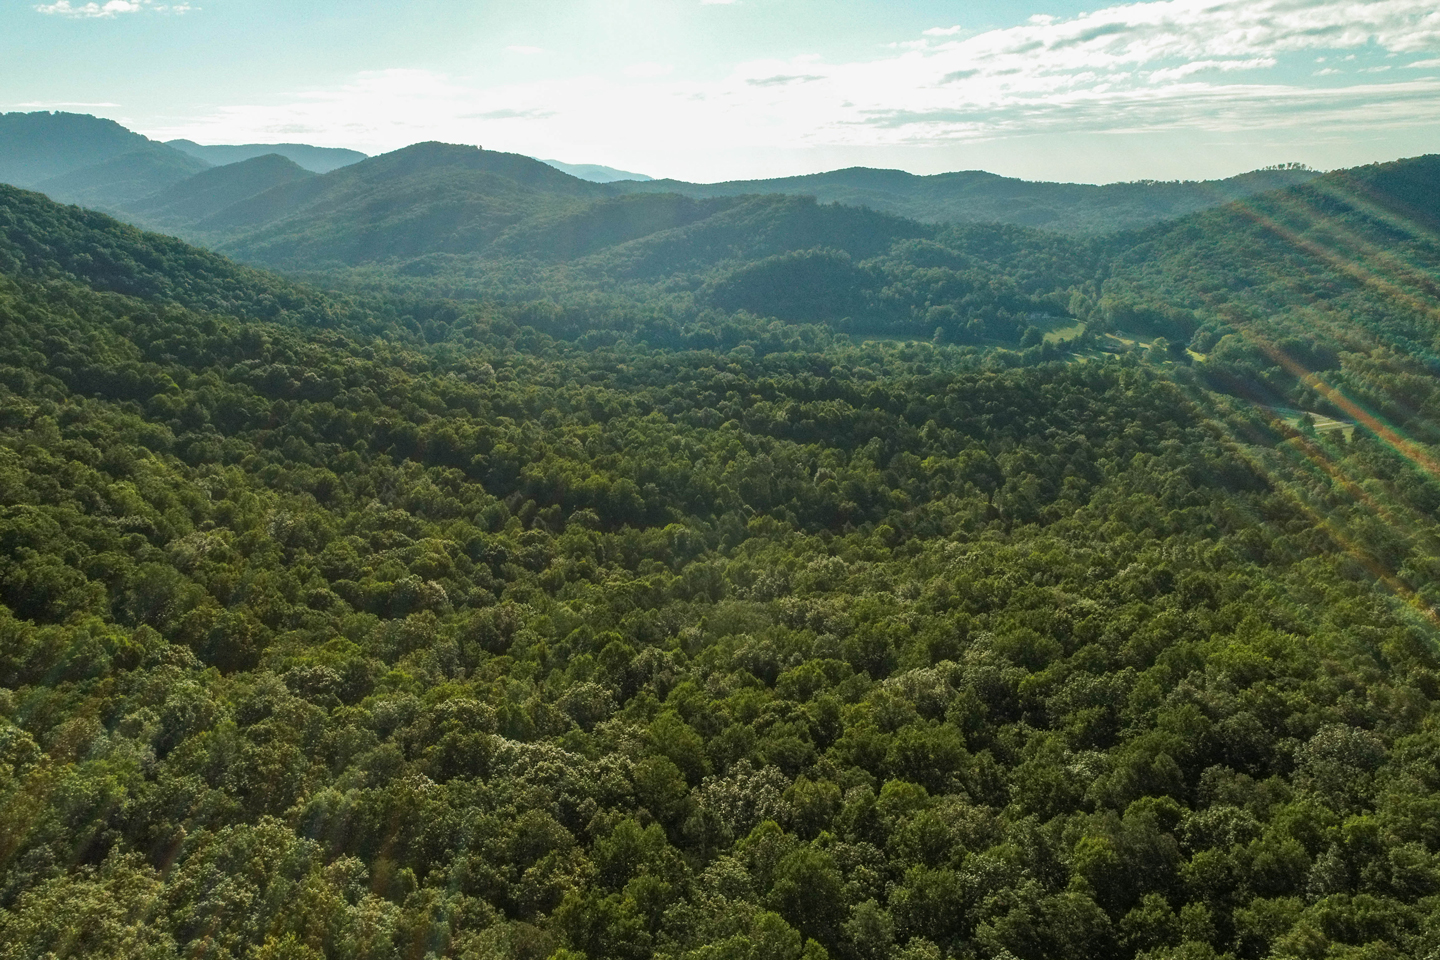 The conservation of this property significantly expands protected acreage along the Blue Ridge Escarpment.